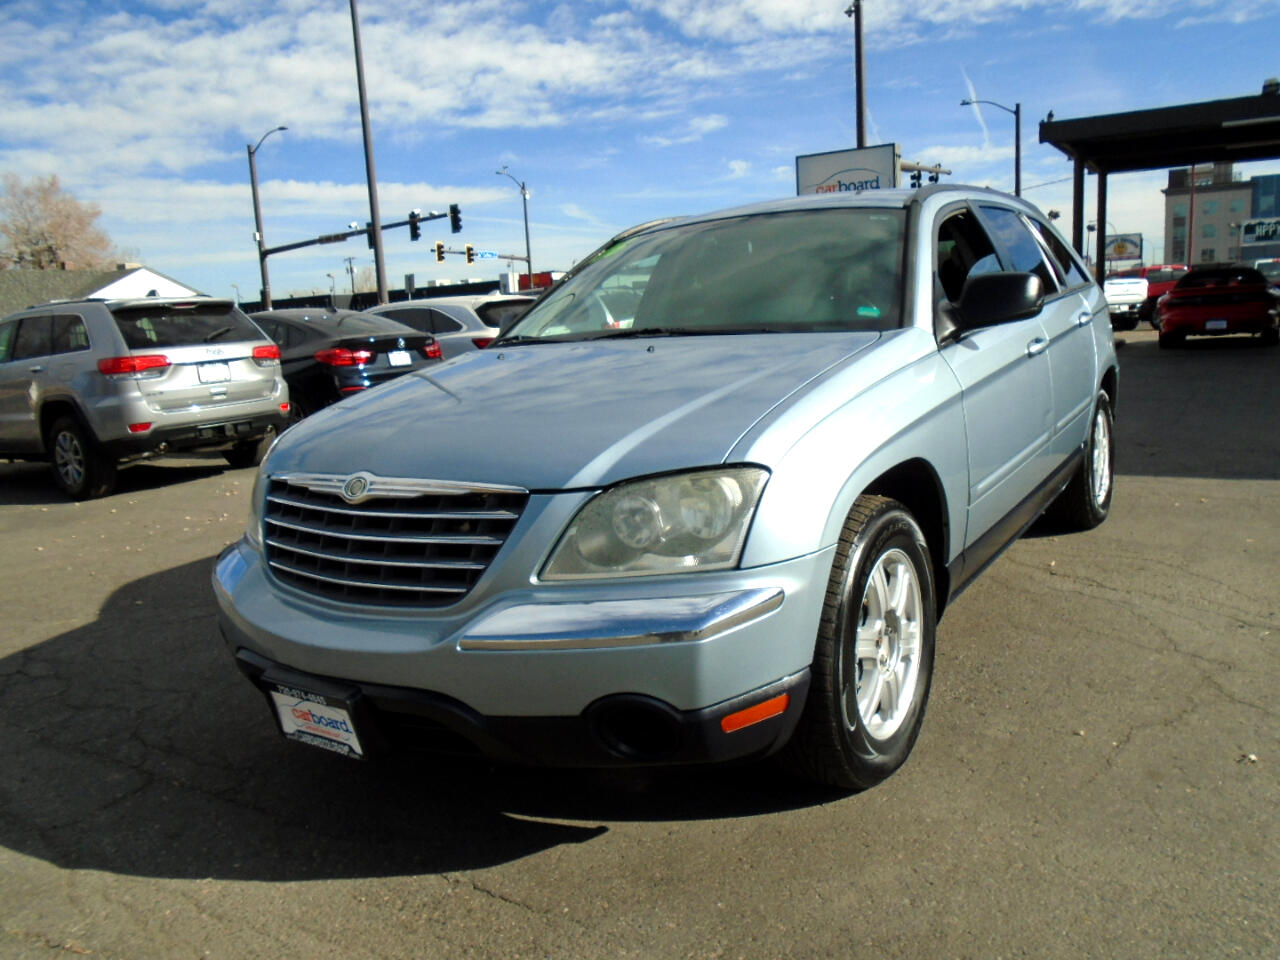 Chrysler Pacifica 4dr Wgn Touring AWD 2006